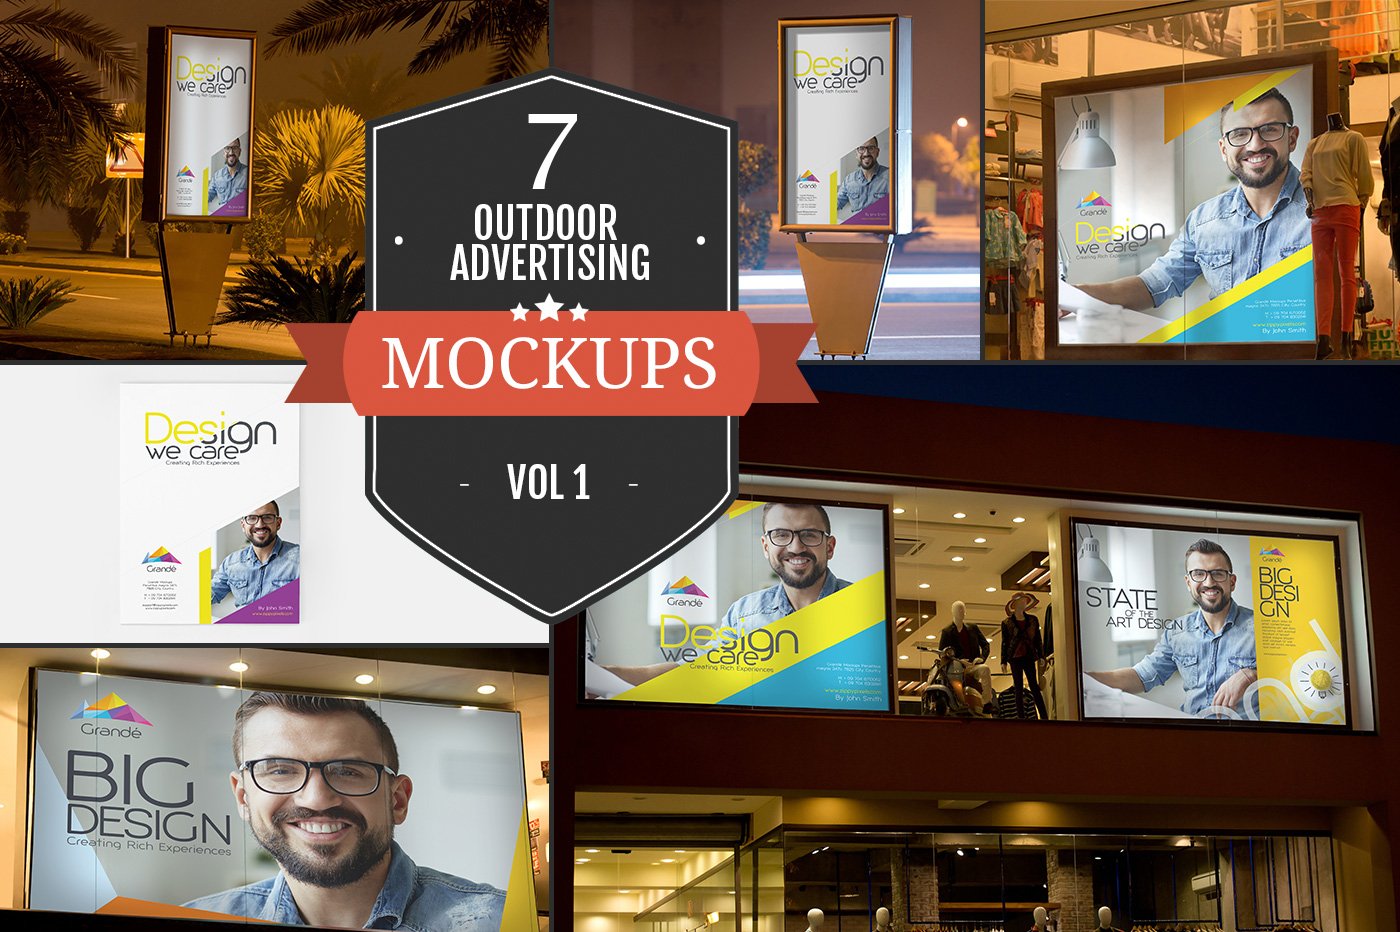 Outdoor Advertising Mockups Vol. 1 cover image.